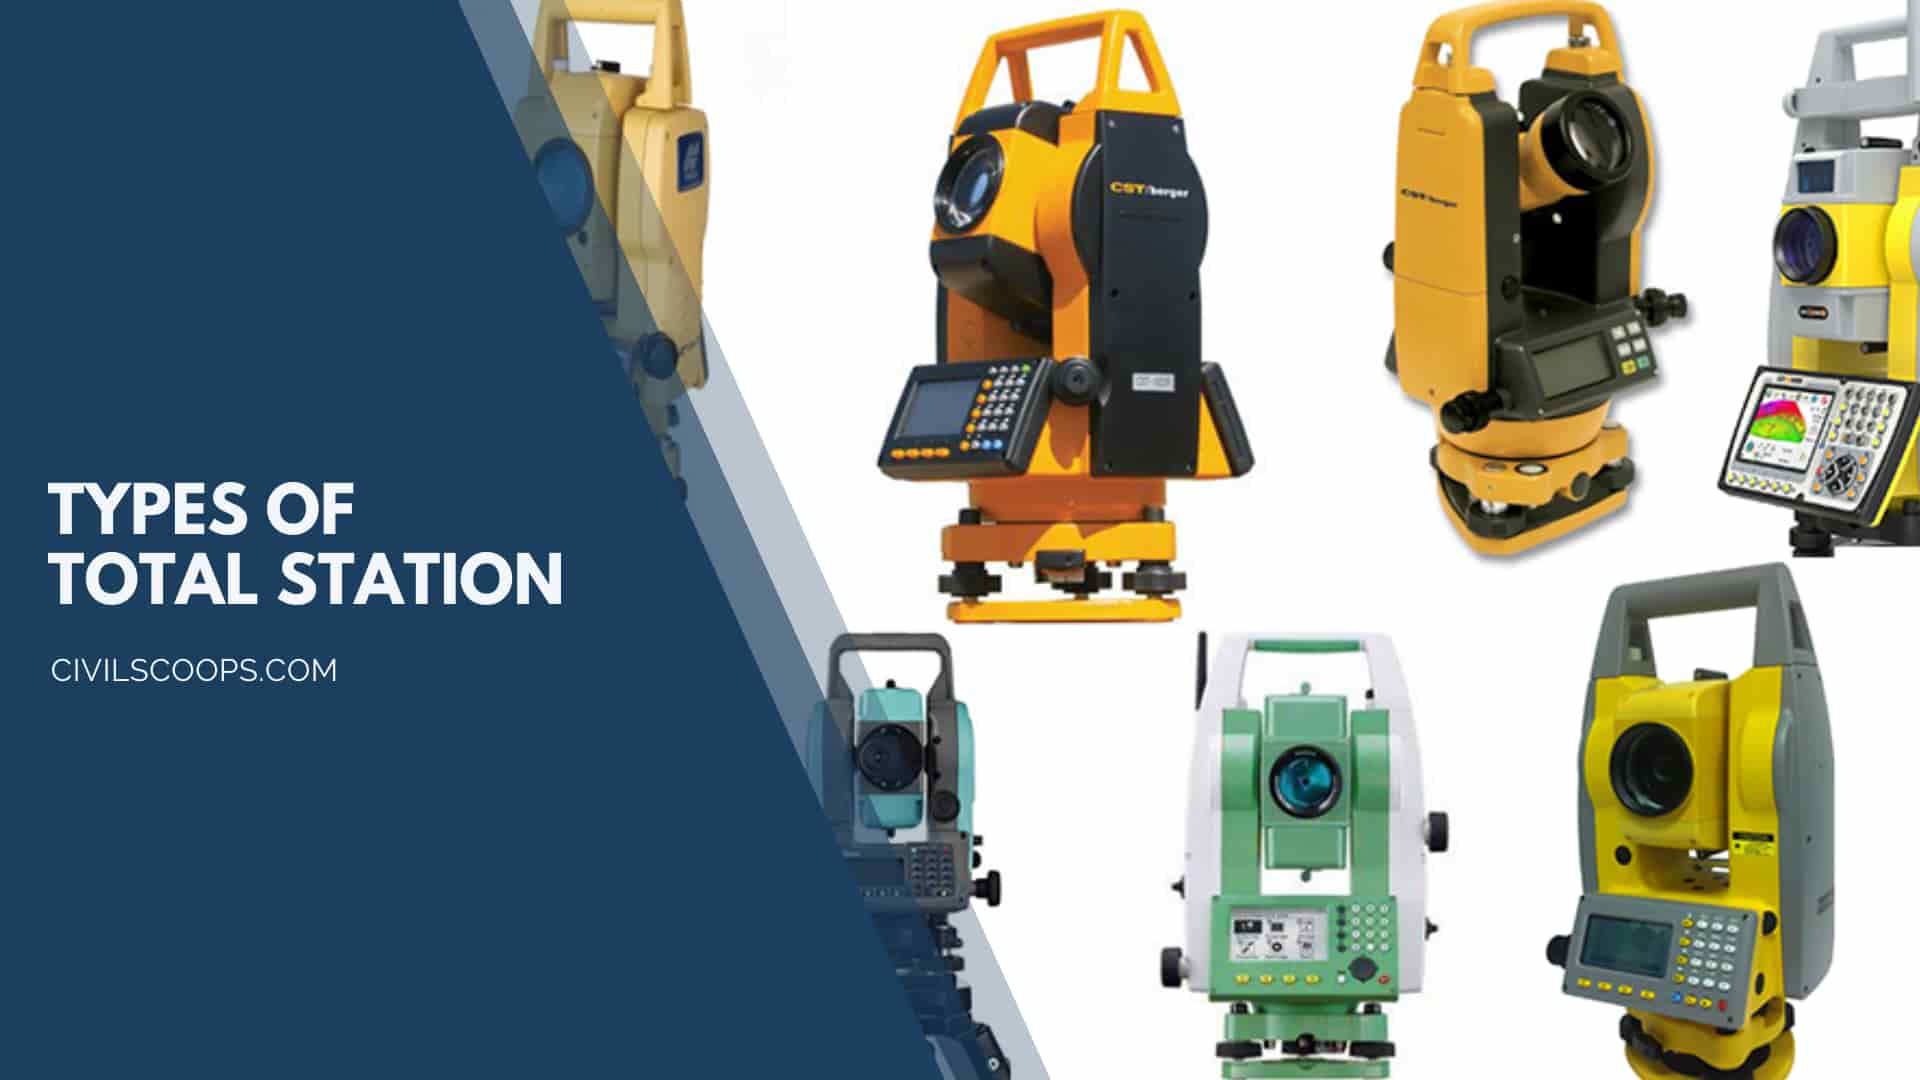 Types of Total Station